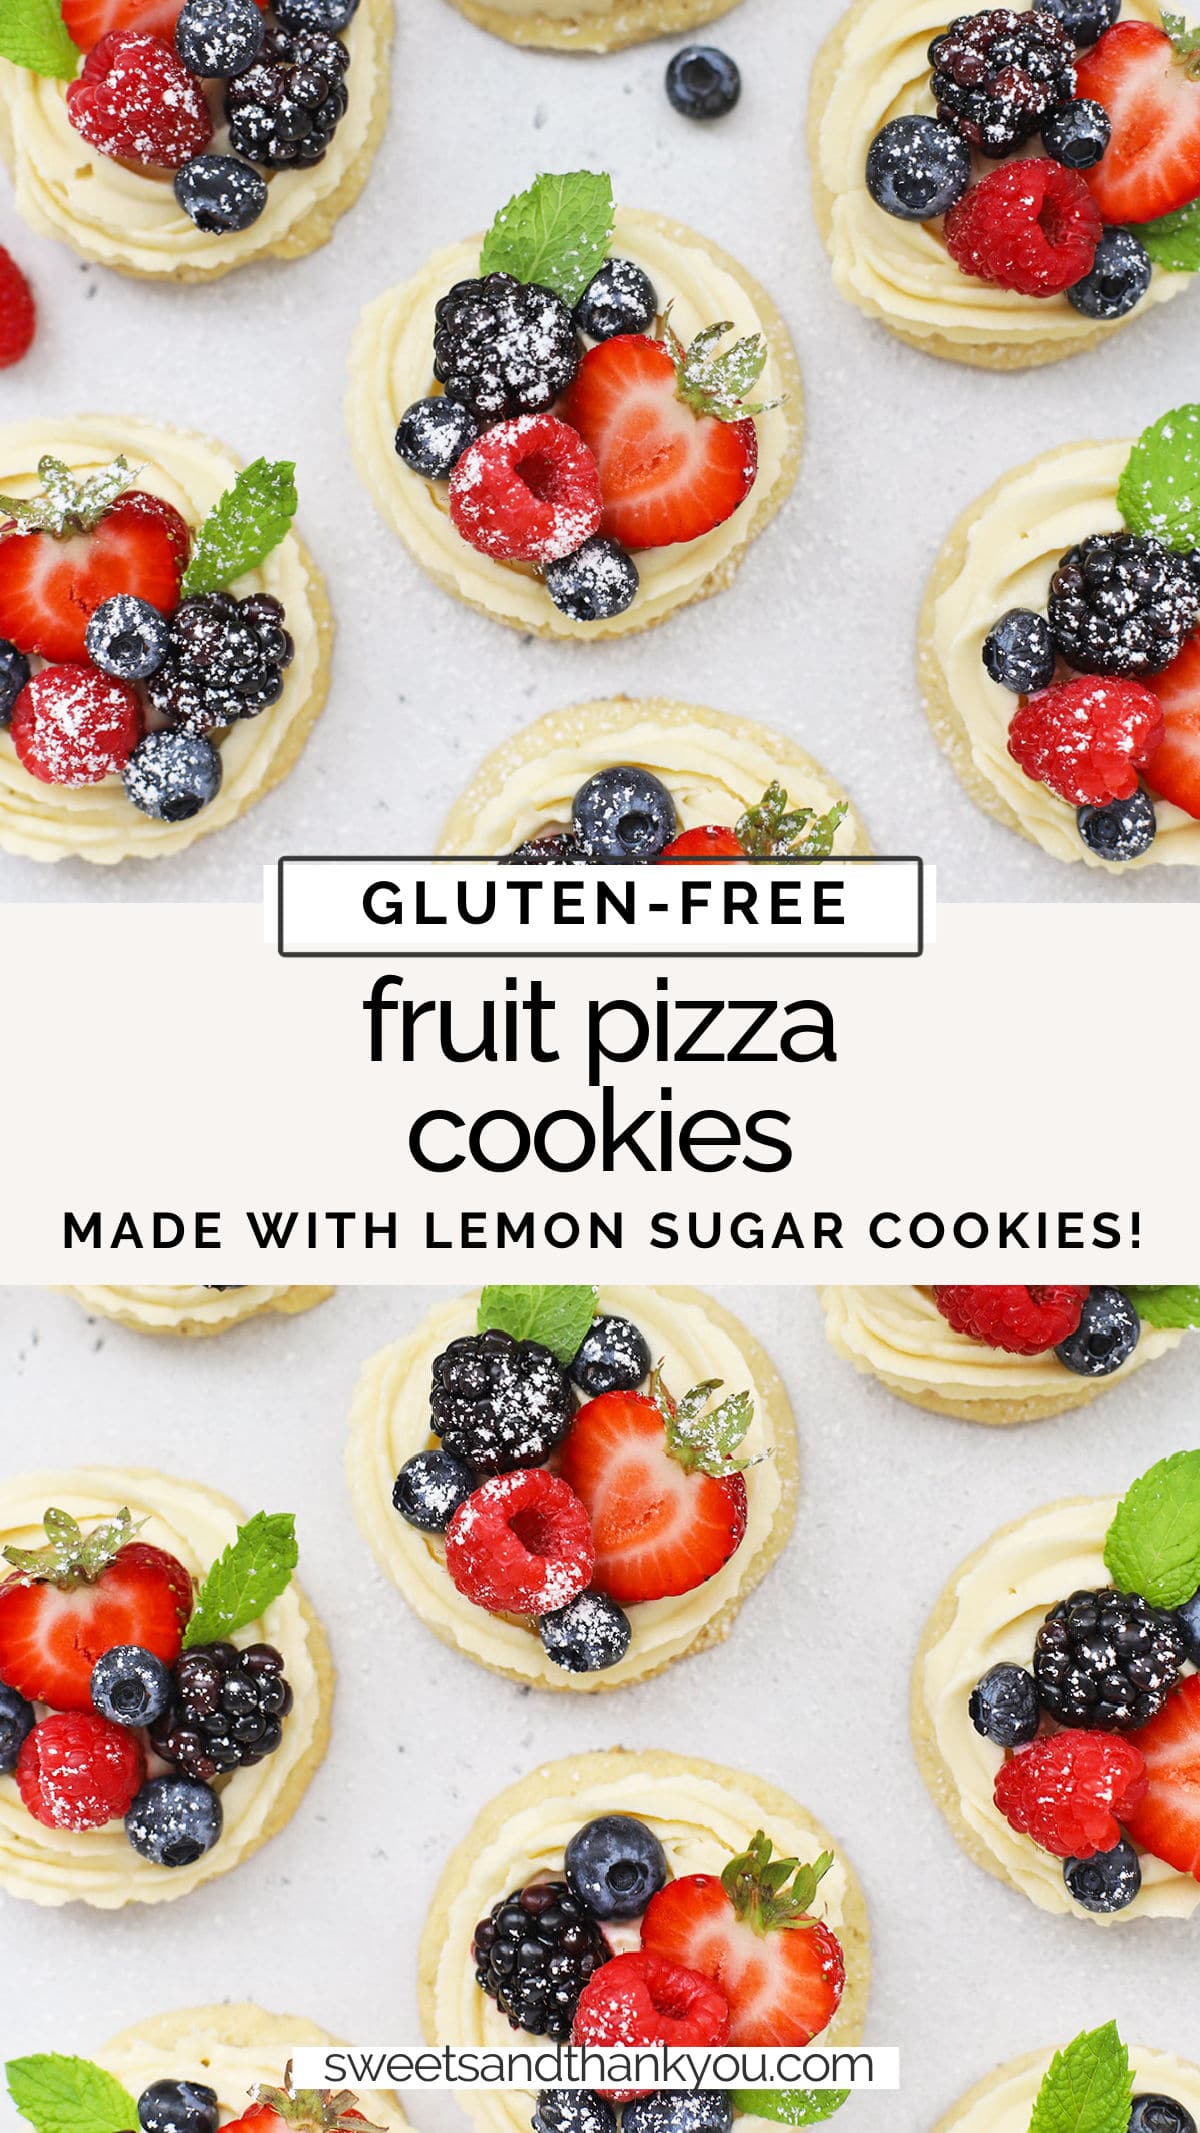 Mini Fruit Pizza Cookies - These mini gluten-free fruit pizzas are made from gluten-Free lemon sugar cookies, a light cream cheese frosting, and fresh berries. They're beautiful and easy! // Gluten-Free Fruit Pizza // Mini Fruit Pizzas // Fruit pizza cookie recipe // Gluten Free lemon cookies